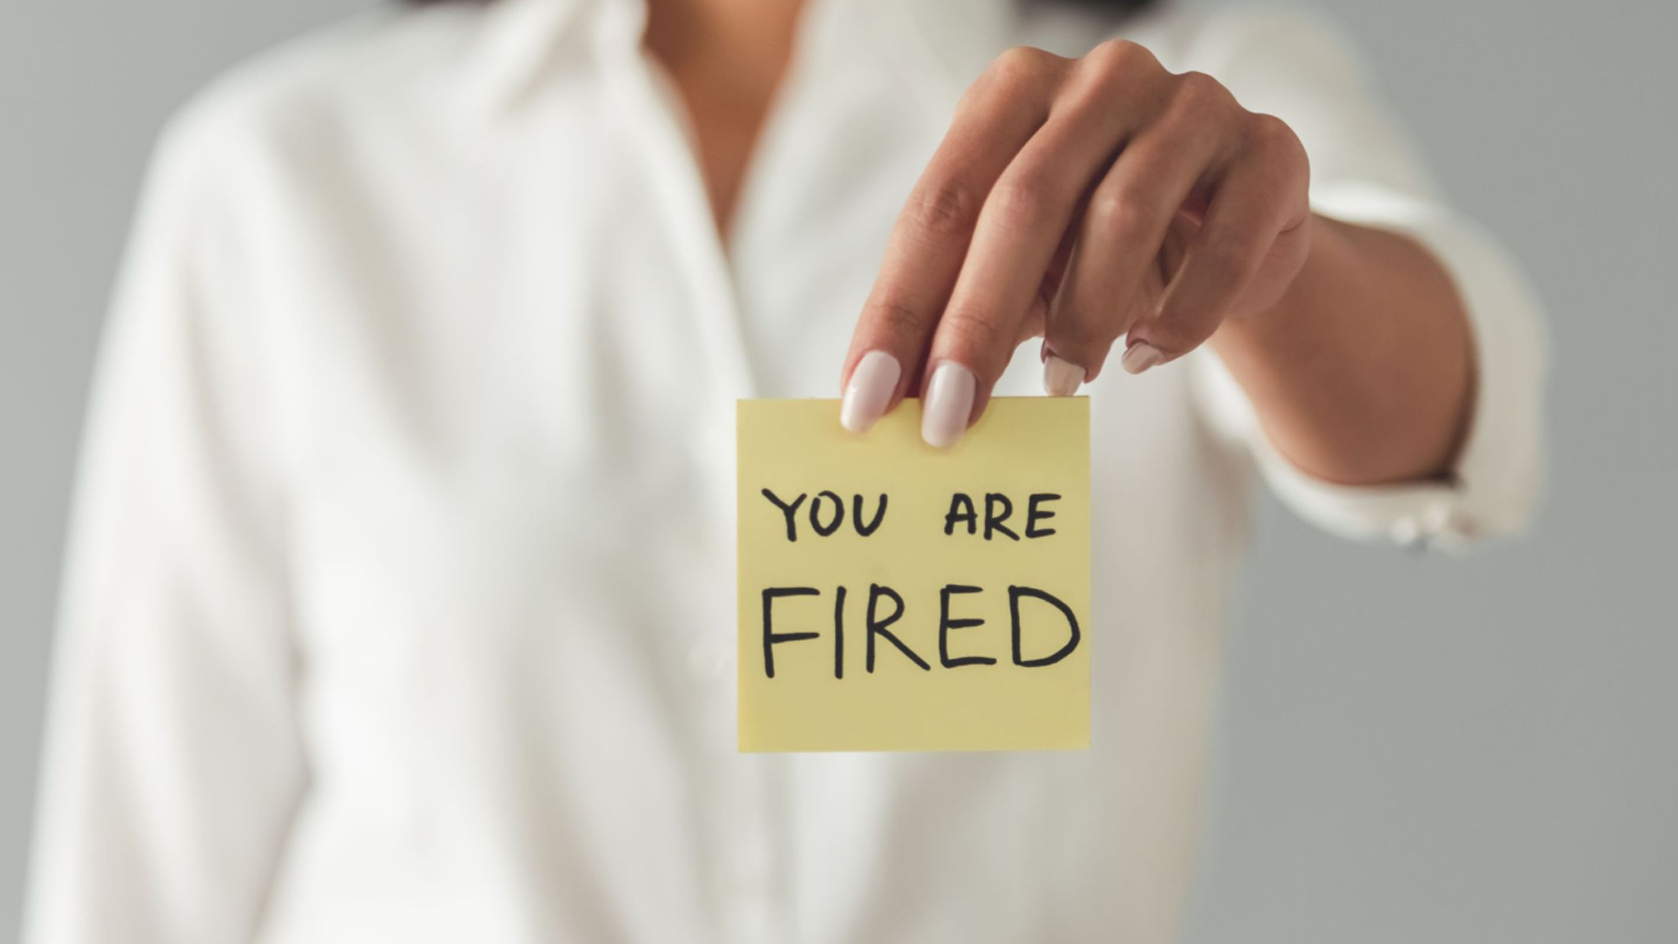 You're fired...